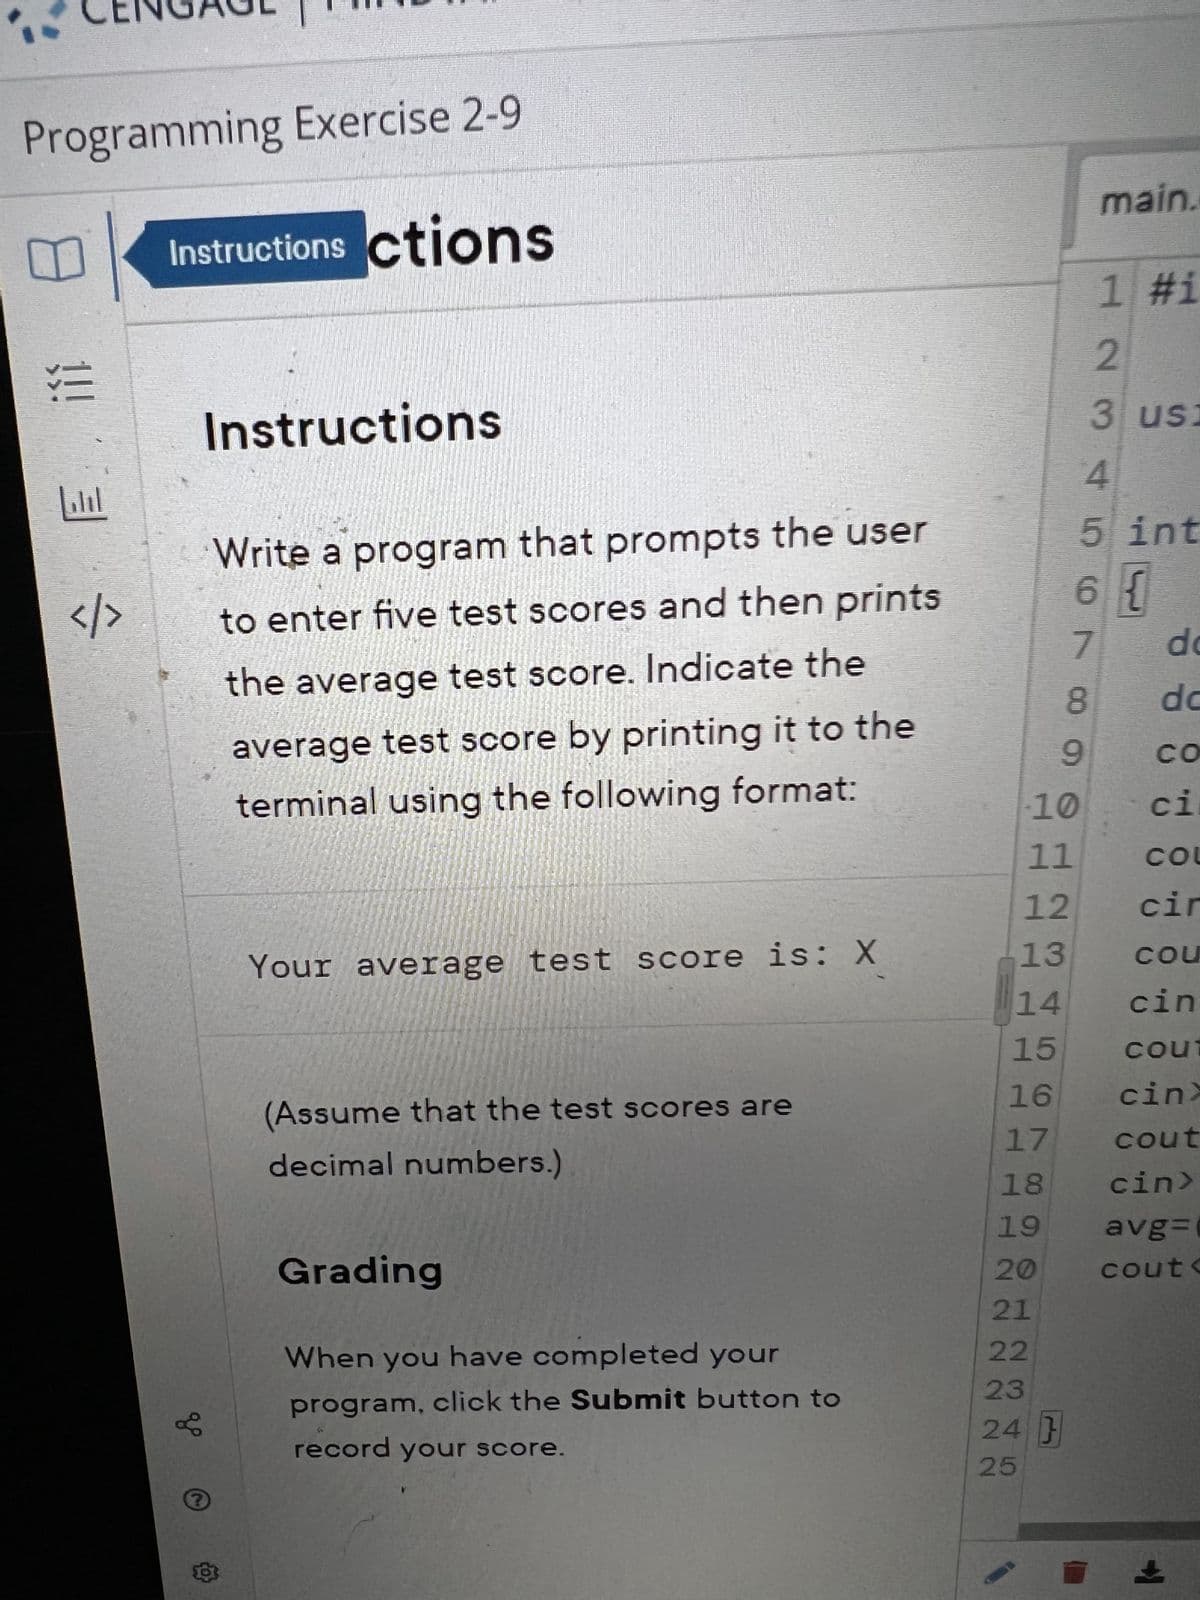 Programming Exercise 2-9
Instructions ctions
!!! 3
</>
до
Instructions
?
Write a program that prompts the user
to enter five test scores and then prints
the average test score. Indicate the
average test score by printing it to the
terminal using the following format:
Your average test score is: X
(Assume that the test scores are
decimal numbers.)
Grading
When you have completed your
program, click the Submit button to
record your score.
18
19
20
10
11
12
13
14
15
16
17
21
22
23
24 }
25
main.
9
1 #i
2 3 4 up co N 00
3 usi
5 int
6 {
do
dc
CO
ci
COU
cir
COU
cin
cout
cinx
cout
cin>
avg=
cout<
+